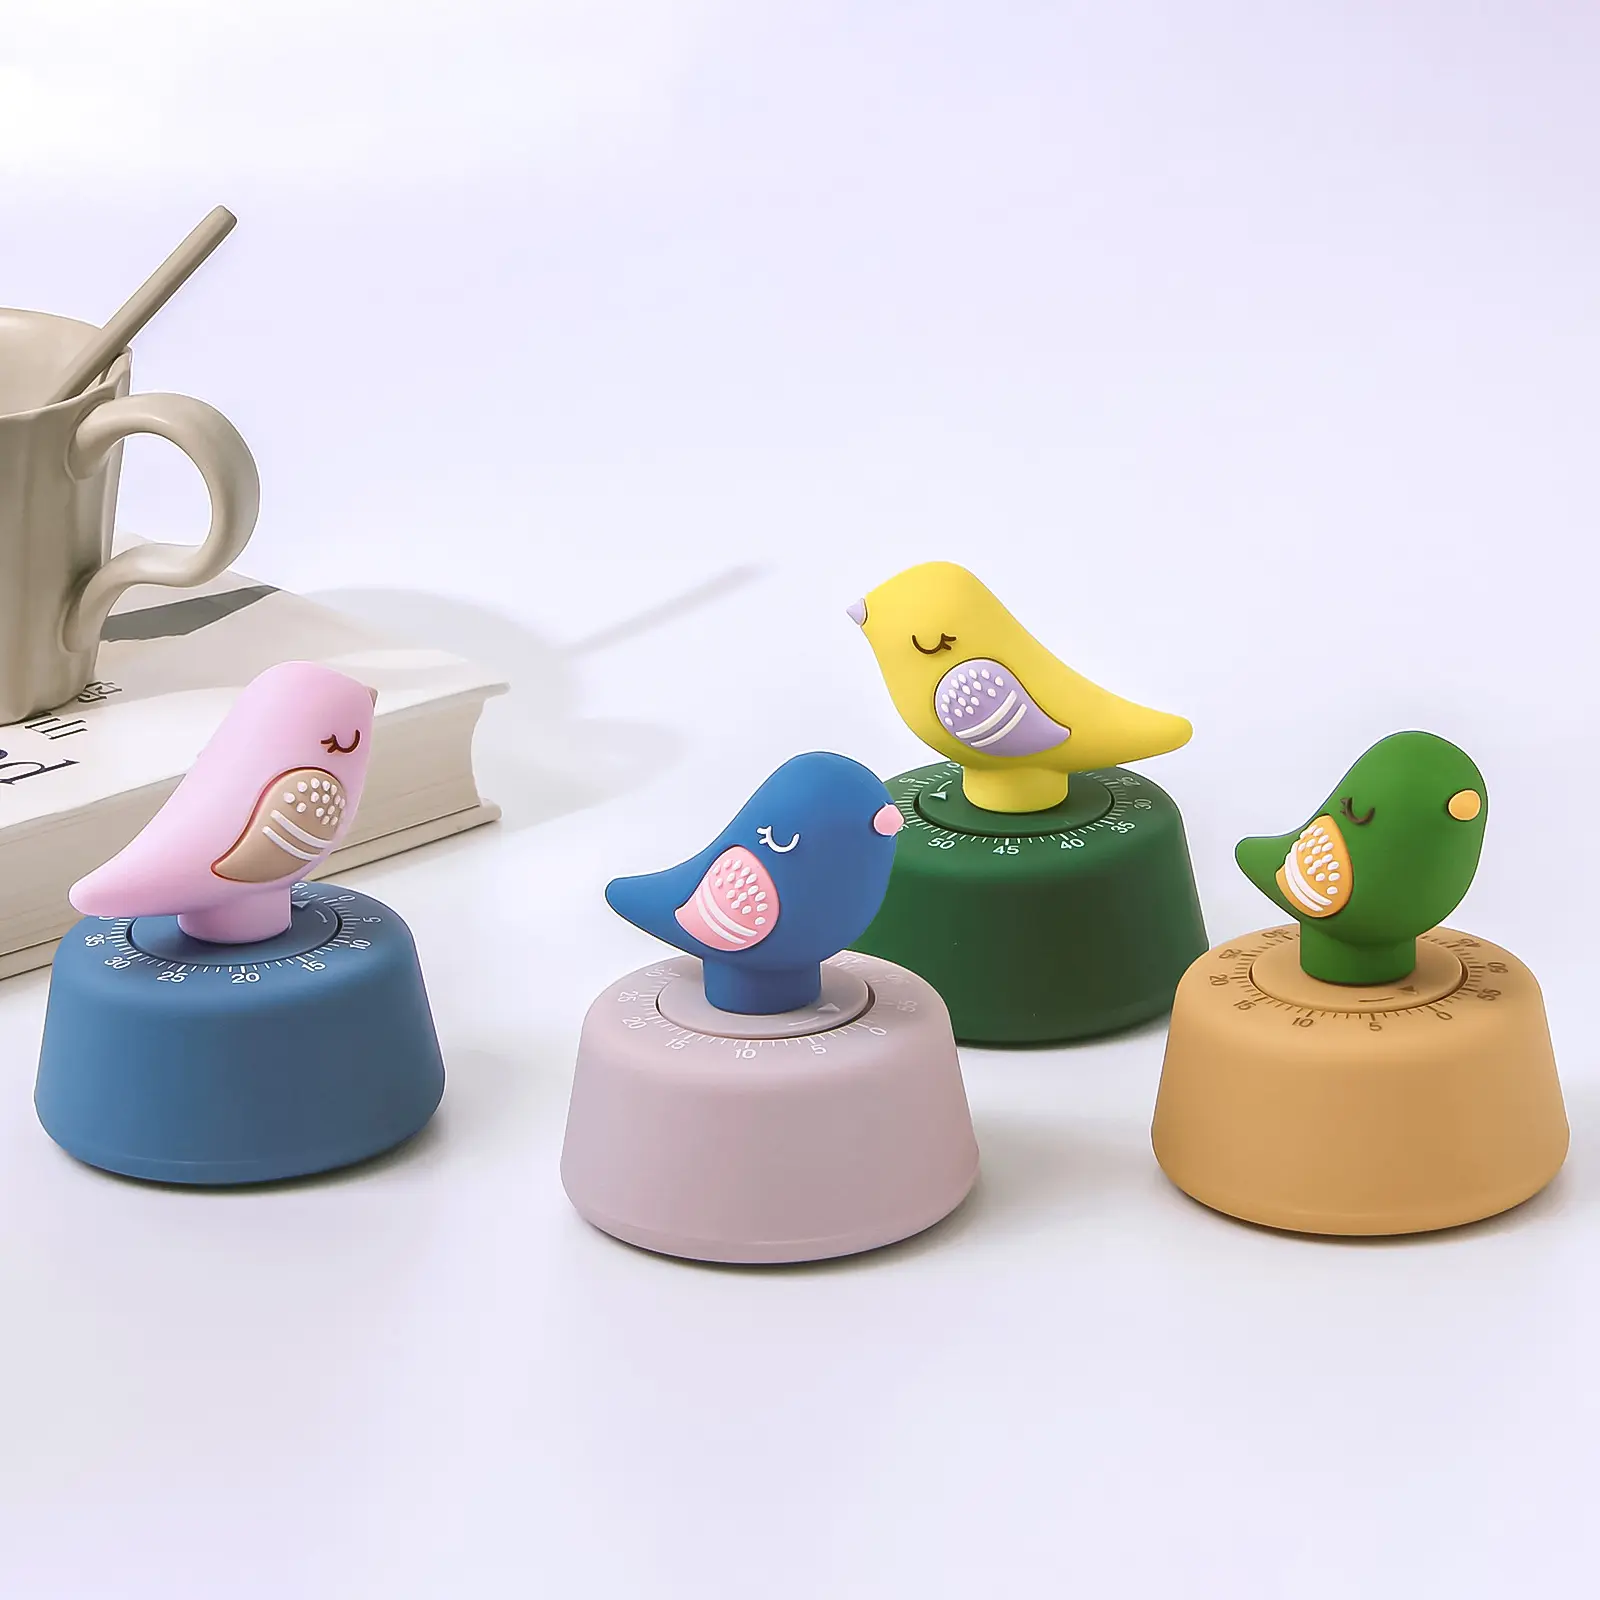 60 Minutes Plastic Cartoon Bird Mechanical Rotating Kitchen Timer for shower learning baking massage Cooking timer